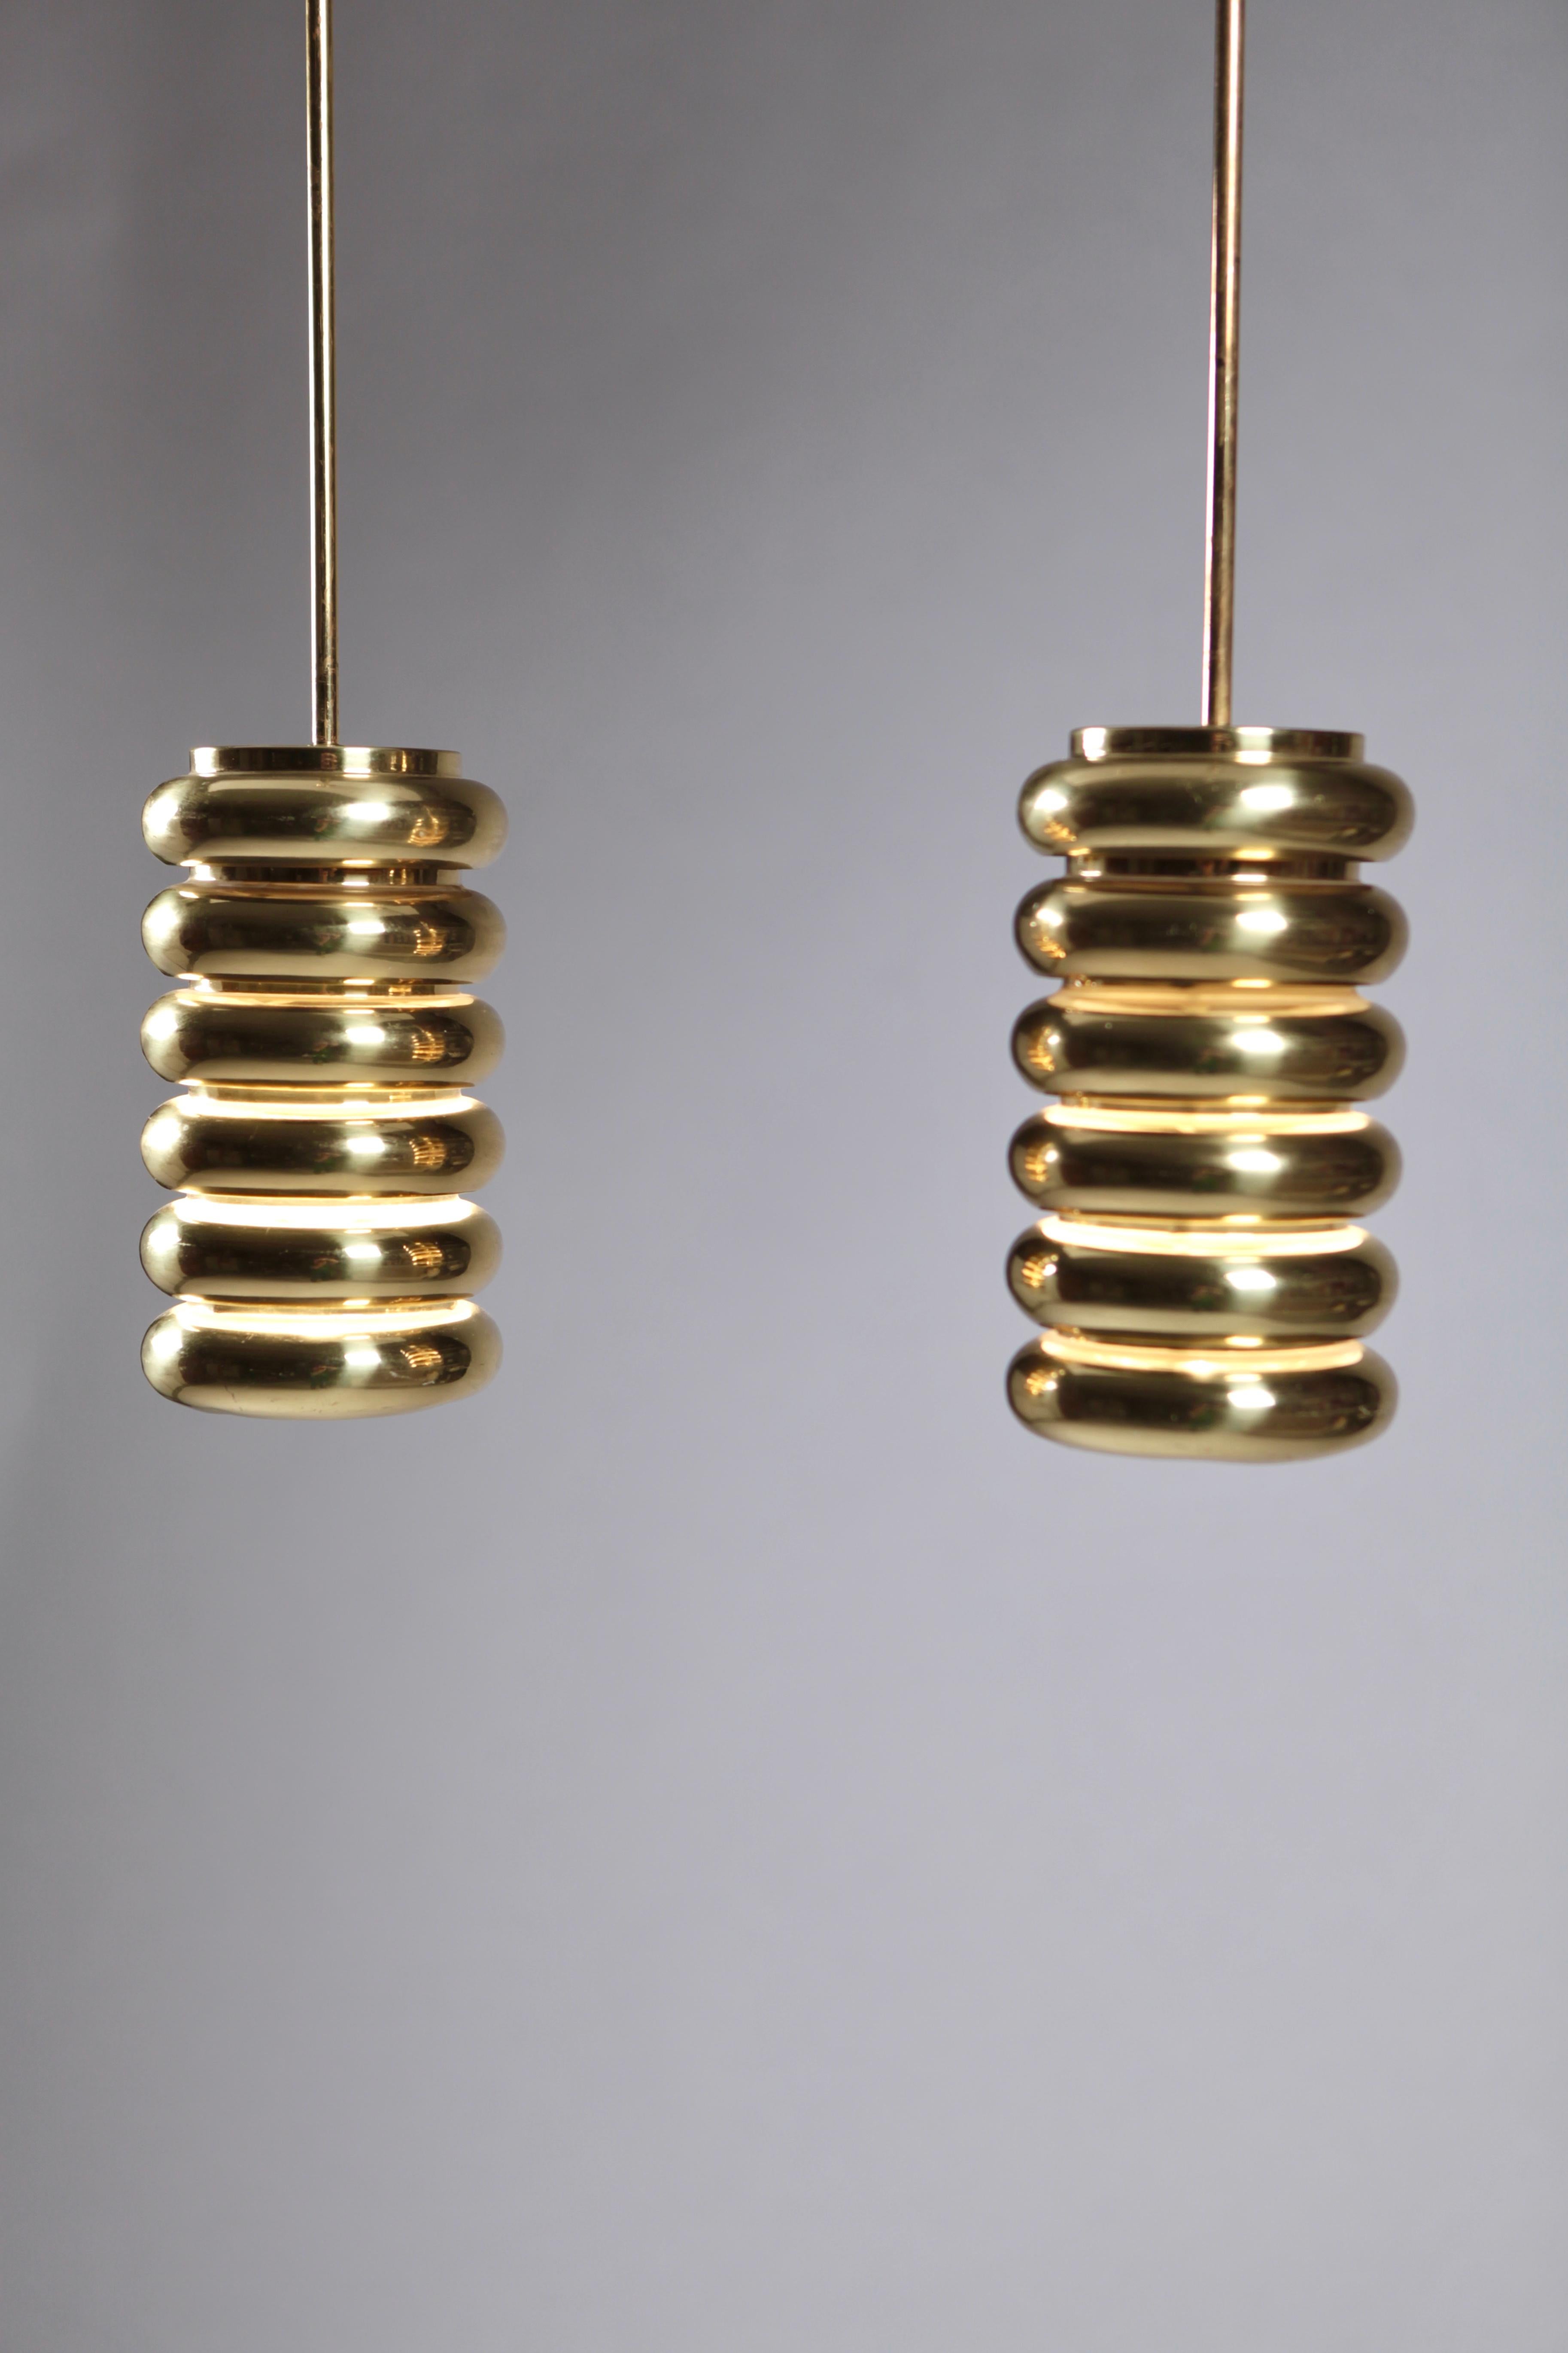 A pair of brass ceiling lights designed by Kari Ruokonen, manufactured by Lynx by Lynx in Finland, 1960s.
Very nice vintage condition.